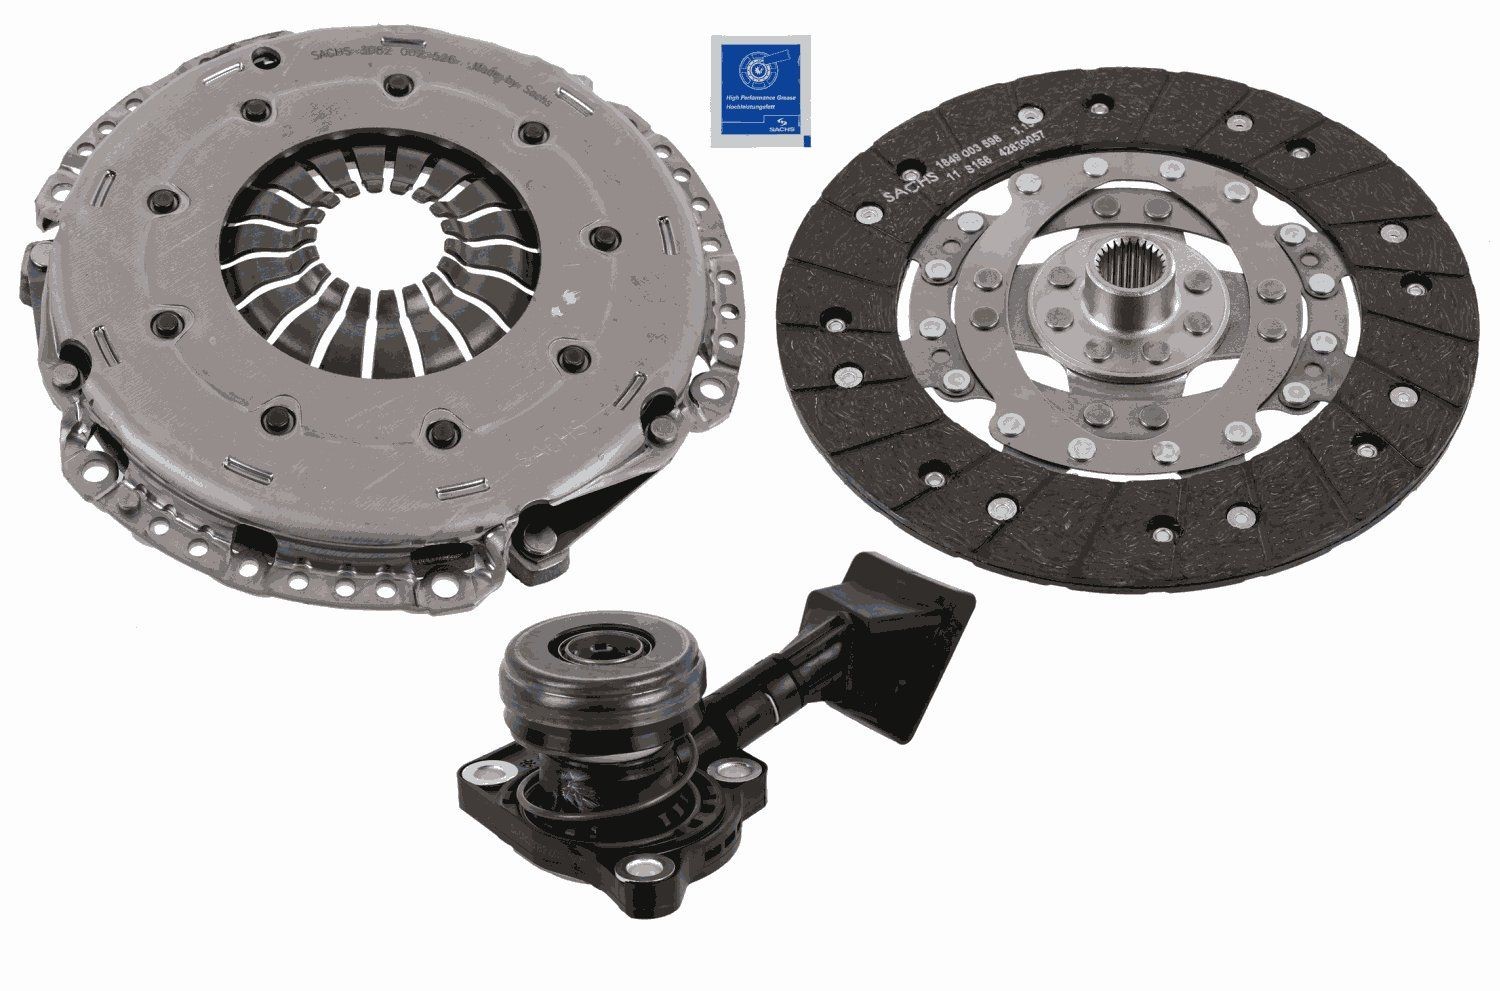 Original SACHS Clutch and flywheel kit 3000 990 455 for CITROЁN DS4